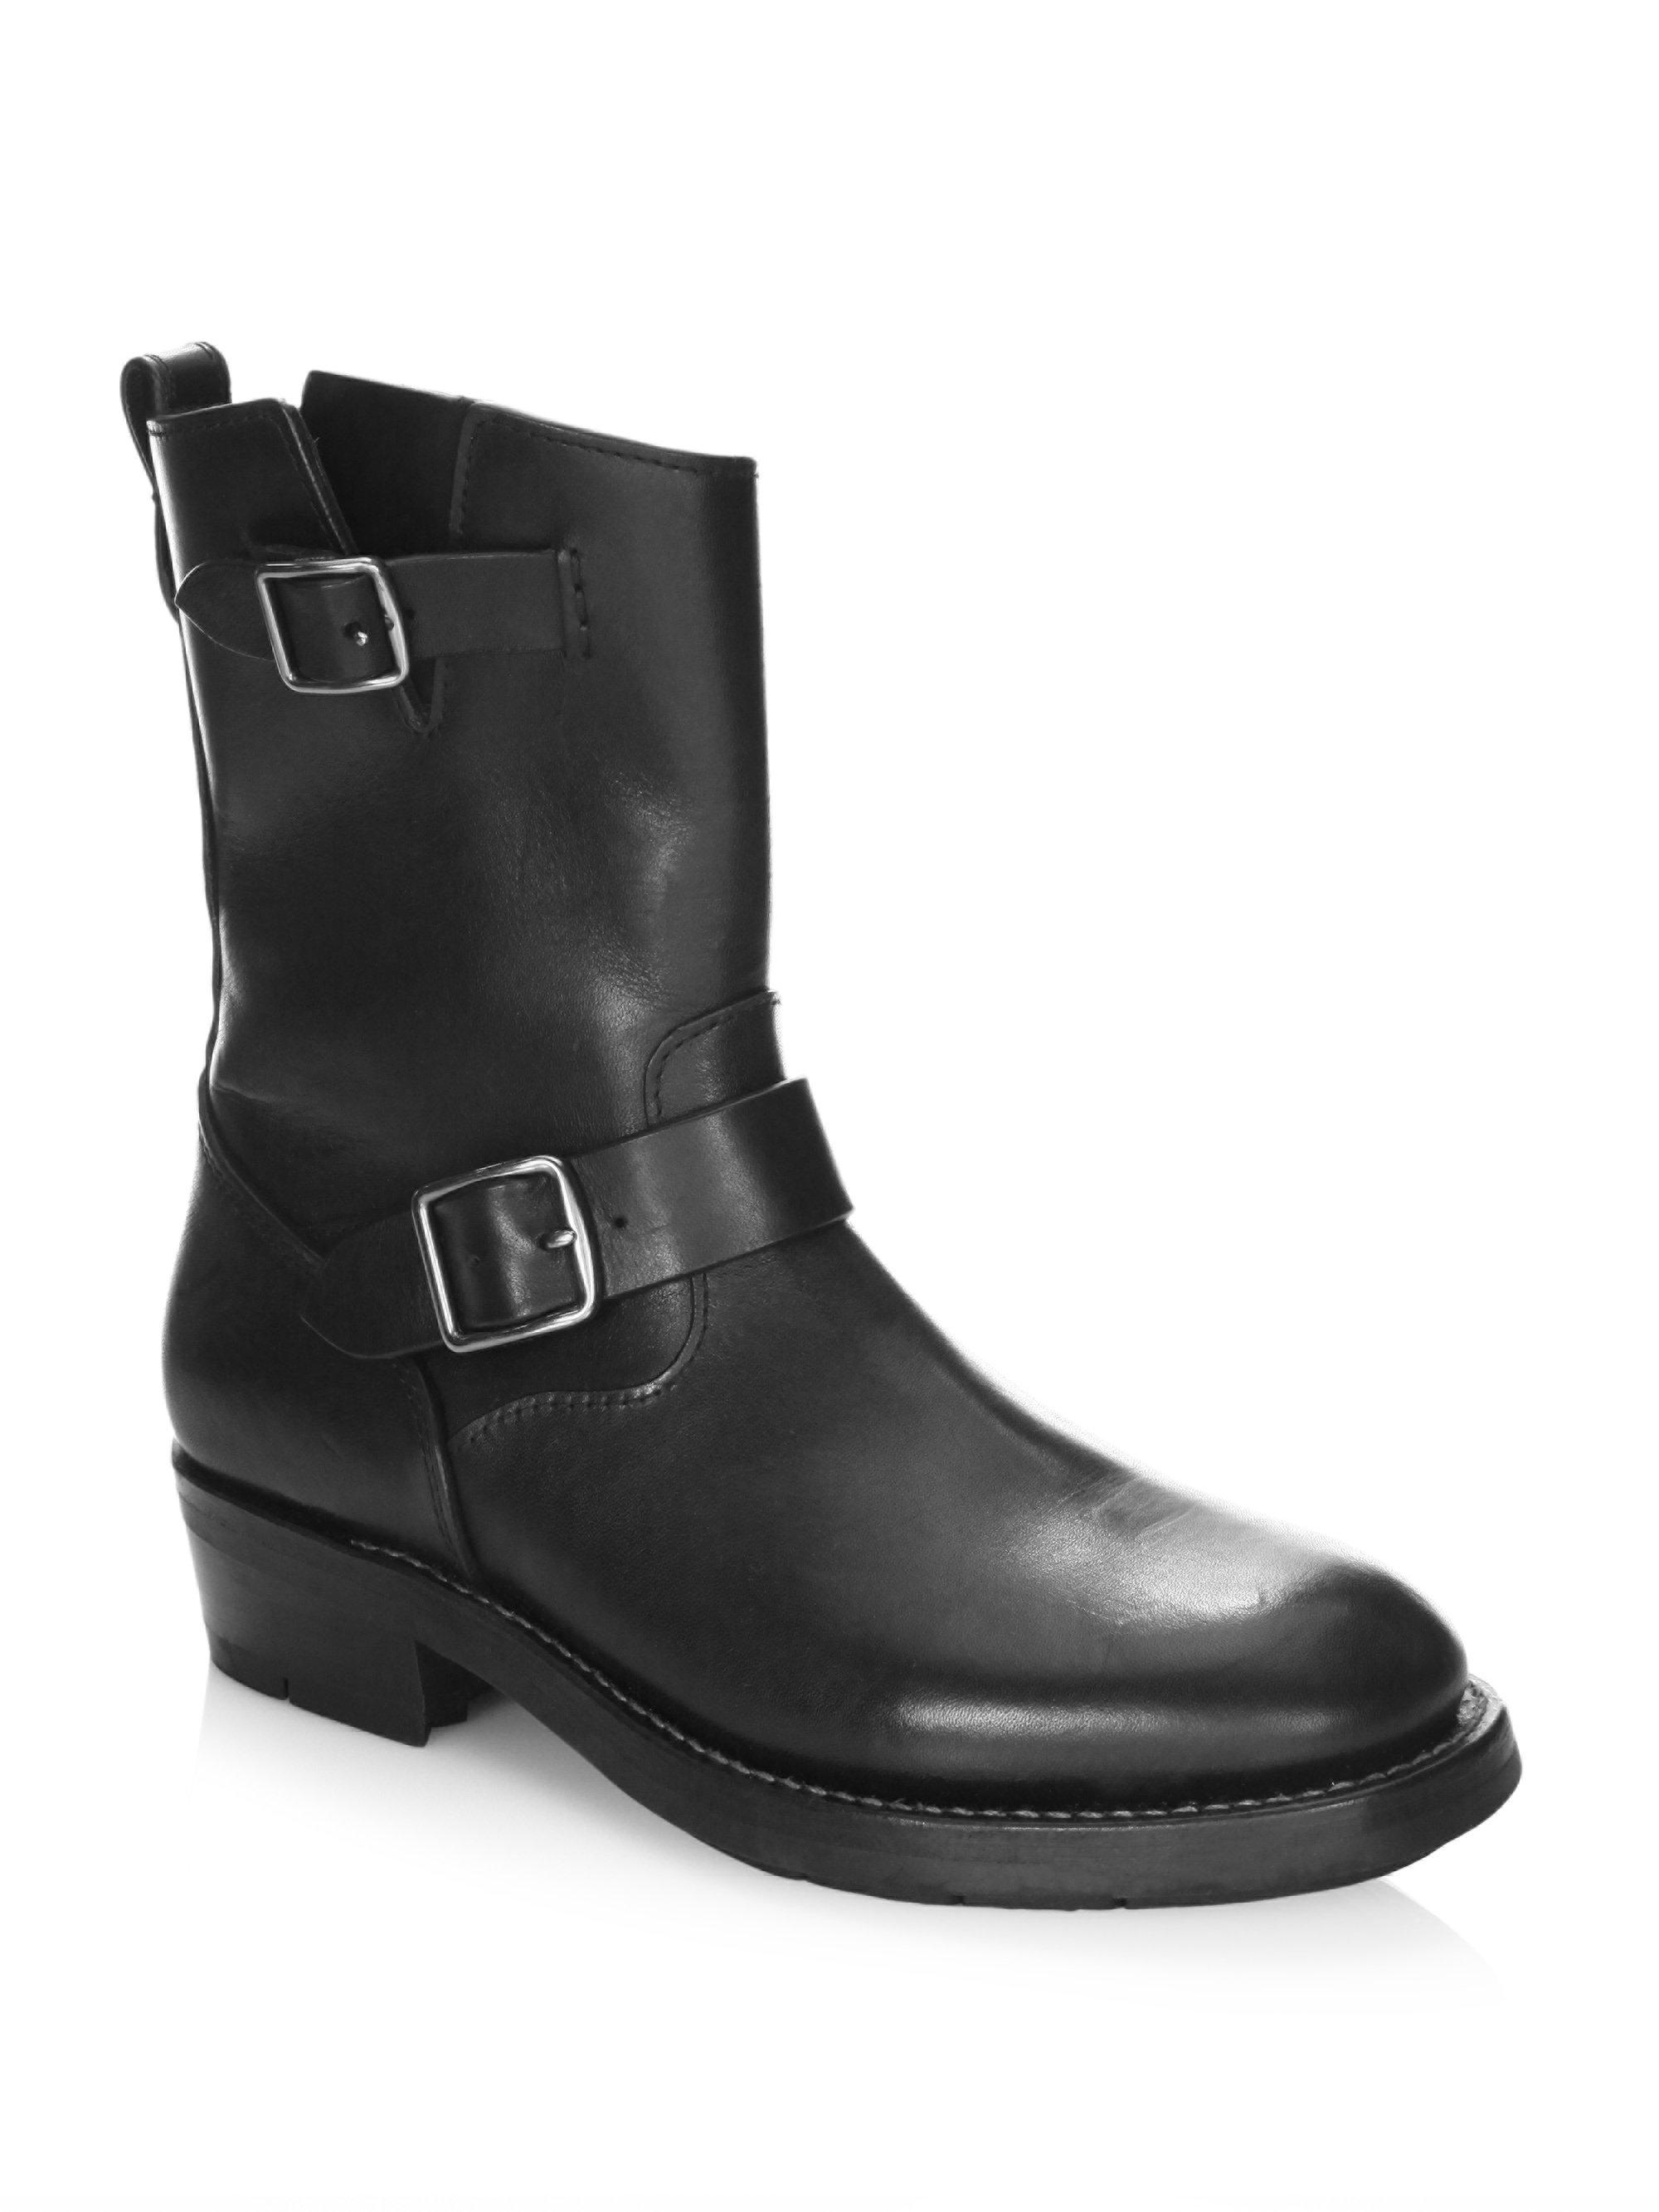 COACH Moto Leather Midcalf Boots in Black Lyst